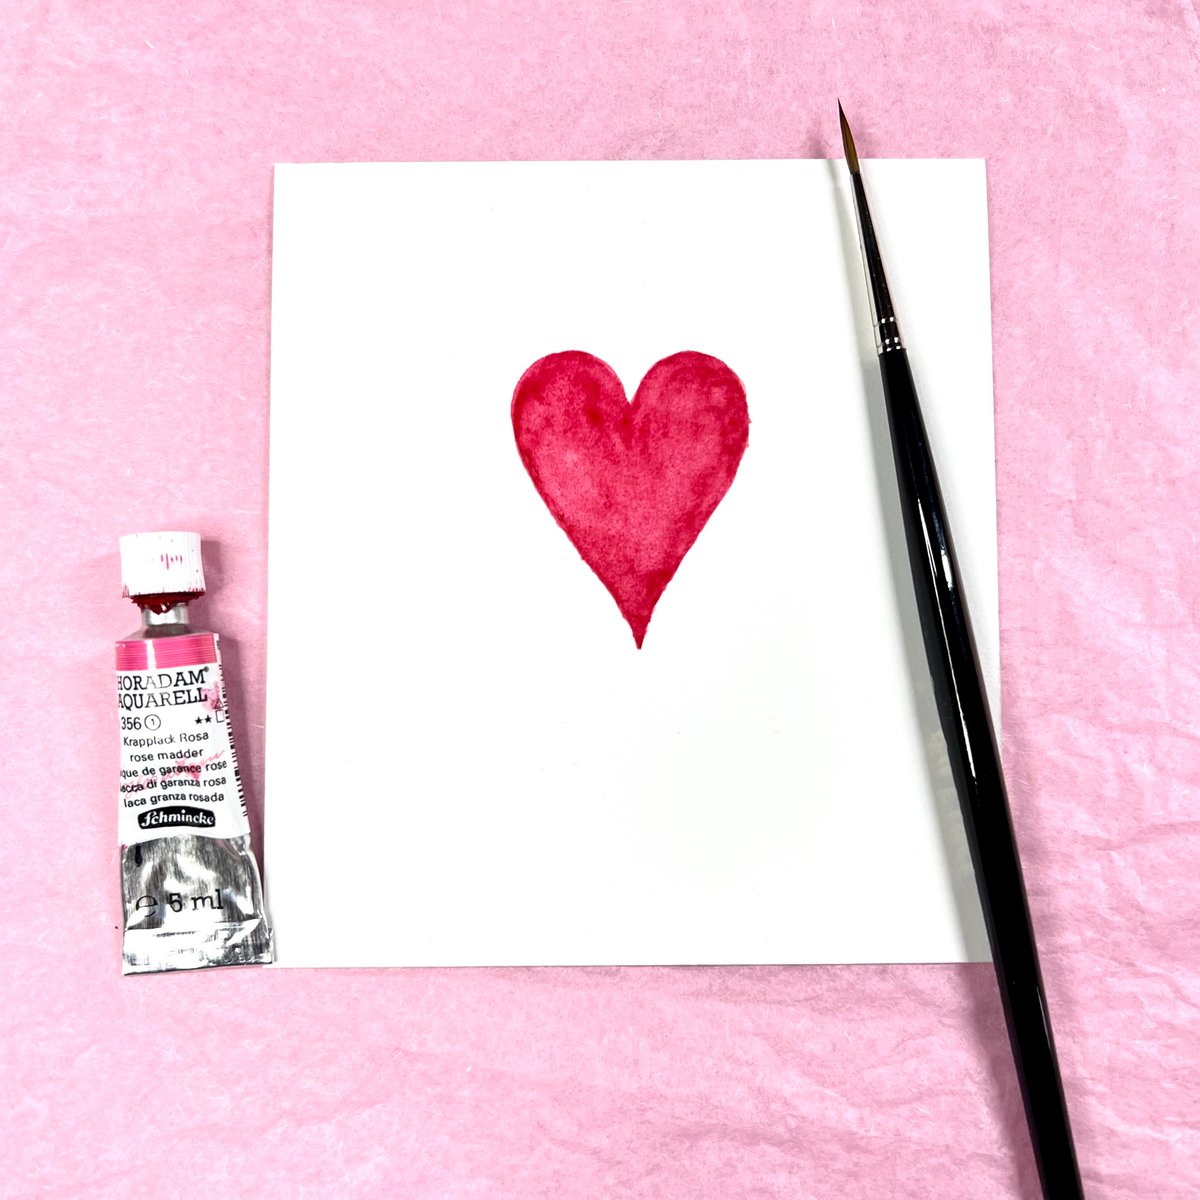 Watercolor painting of a pink heart valentine's day card. #Valentine #ValentinesDay #ValentinesDayCard #Card #Cards #Watercolor #Watercolour #PersonalisedCards #Love #happyvalentinesday #heart #valentinesday2023 #happy #art #RedRoses #PinkHeart #painting #NotonTheHighStreet